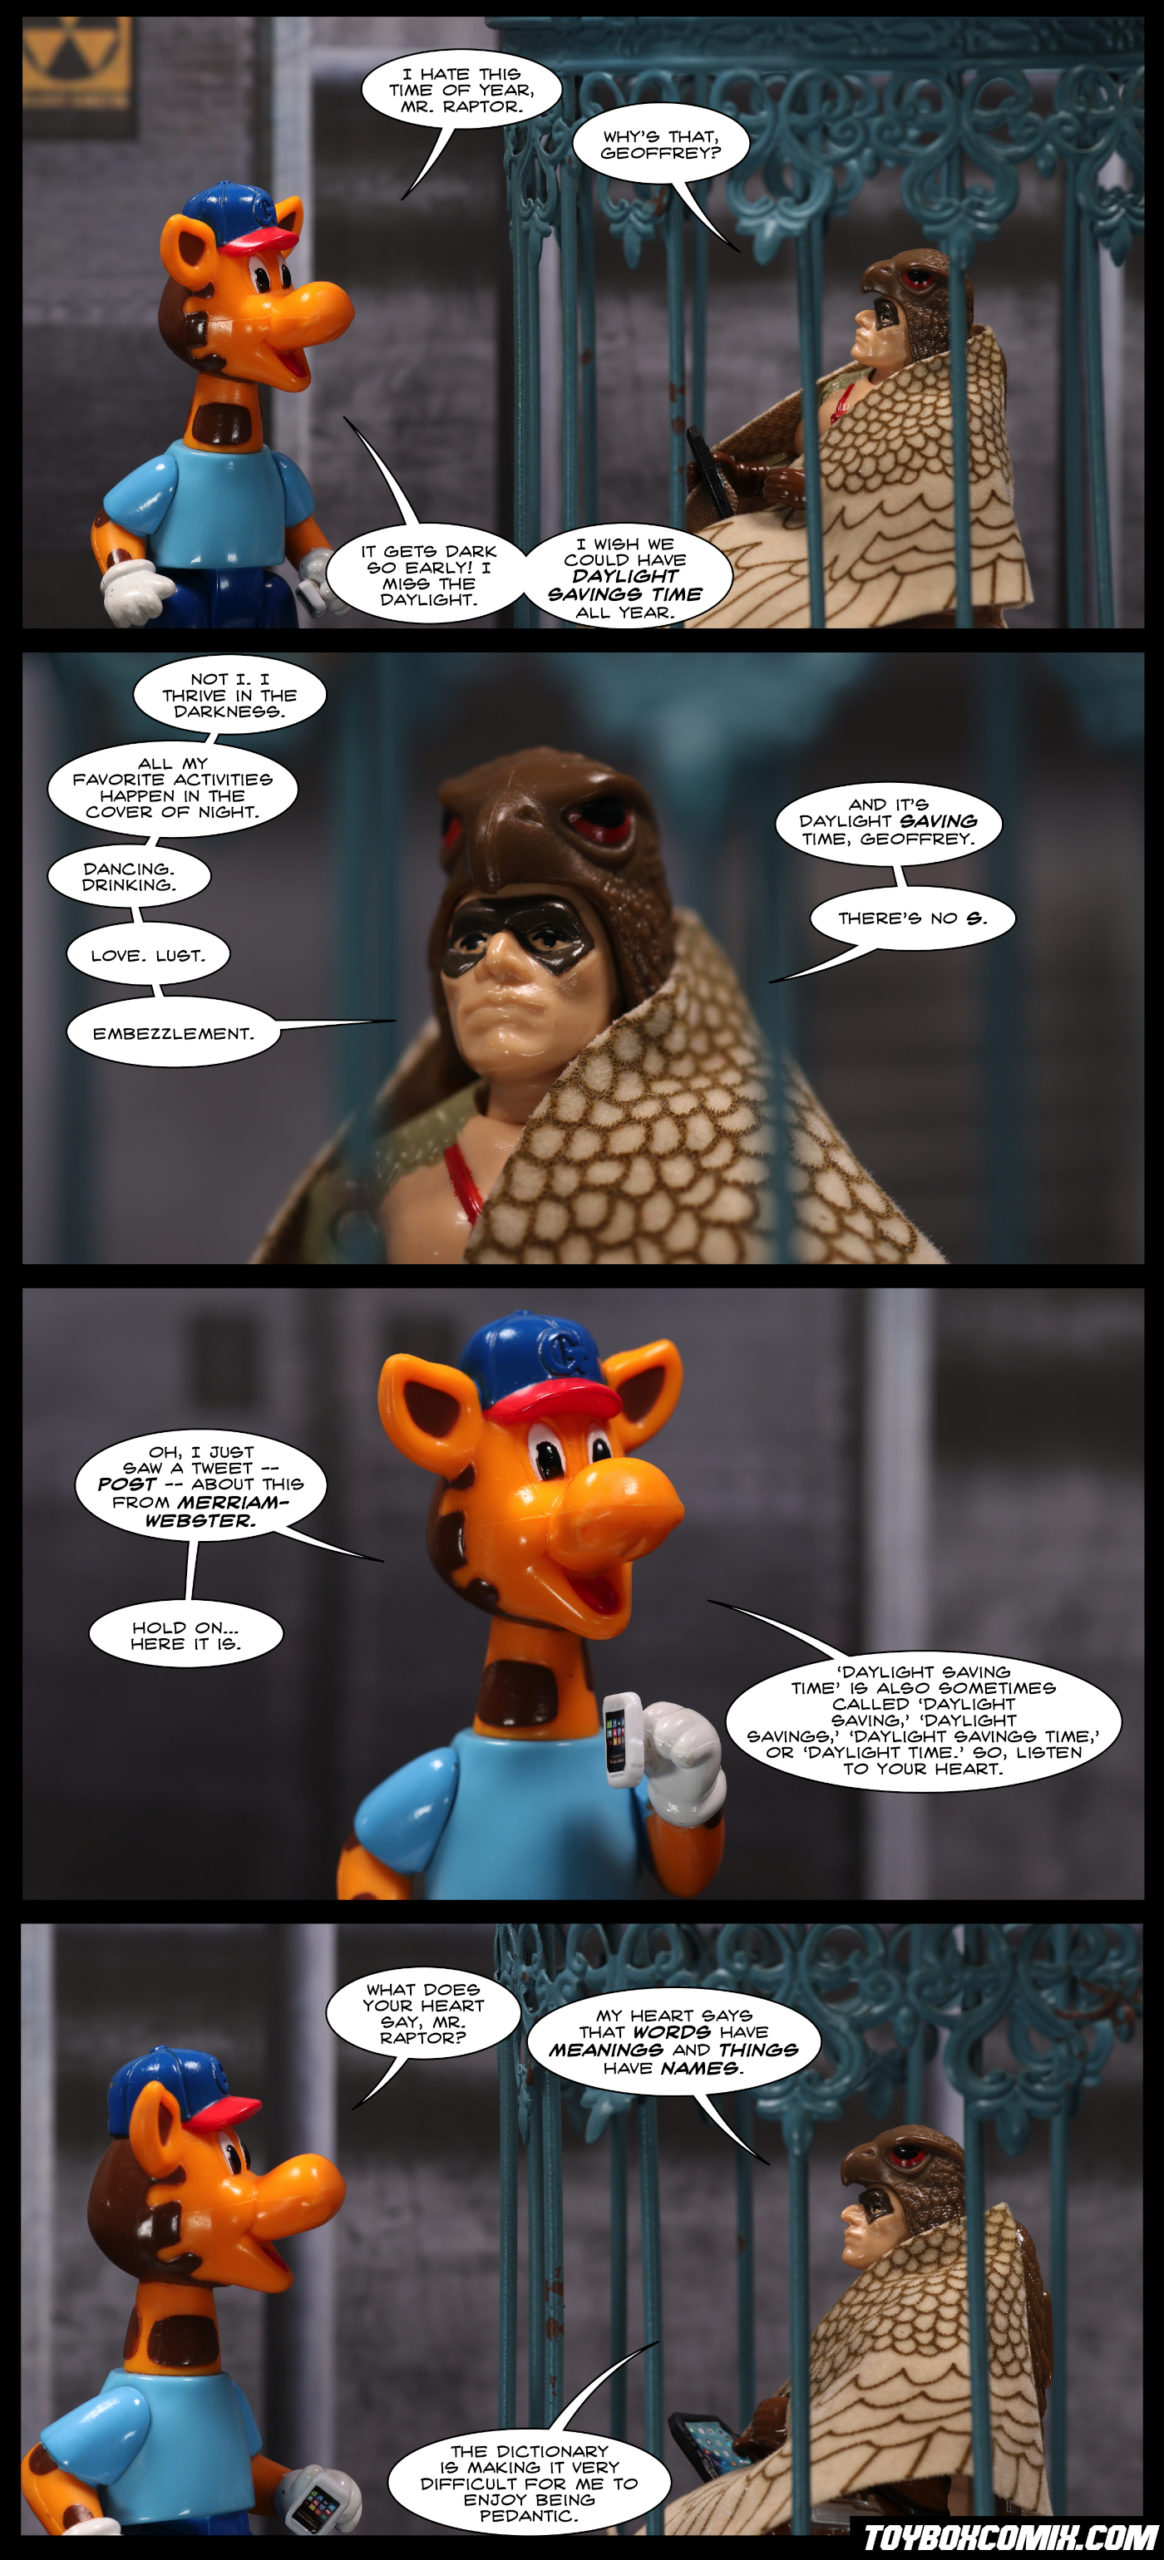 Panel 1: Geoffrey Giraffe: “I hate this time of year, Mr. Raptor.” Raptor (Cobra accountant): “Why’s that, Geoffrey?” Geoffrey: “It gets dark so early! I miss the daylight. I wish we could have Daylight Savings Time all year.” 2: Raptor: “Not I. I thrive in the darkness. All my favorite activities happen in the cover of night. Dancing. Drinking. Love. Lust. Embezzlement. And it’s Daylight Saving Time, Geoffrey. There’s no S.” 3: Geoffrey: “Oh, I just saw a tweet – post – about this from Merriam-Webster. Hold on…here it is. ‘Daylight Saving Time’ is also sometimes called ‘Daylight Saving,’ ‘Daylight Savings,’ ‘Daylight Savings Time,’ or ‘Daylight Time.’ So listen to your heart.” 4: Geoffrey: “What does your heart say, Mr. Raptor?” Raptor: “My heart says that words have meanings and things have names. The dictionary is making it very difficult for me to enjoy being pedantic.”